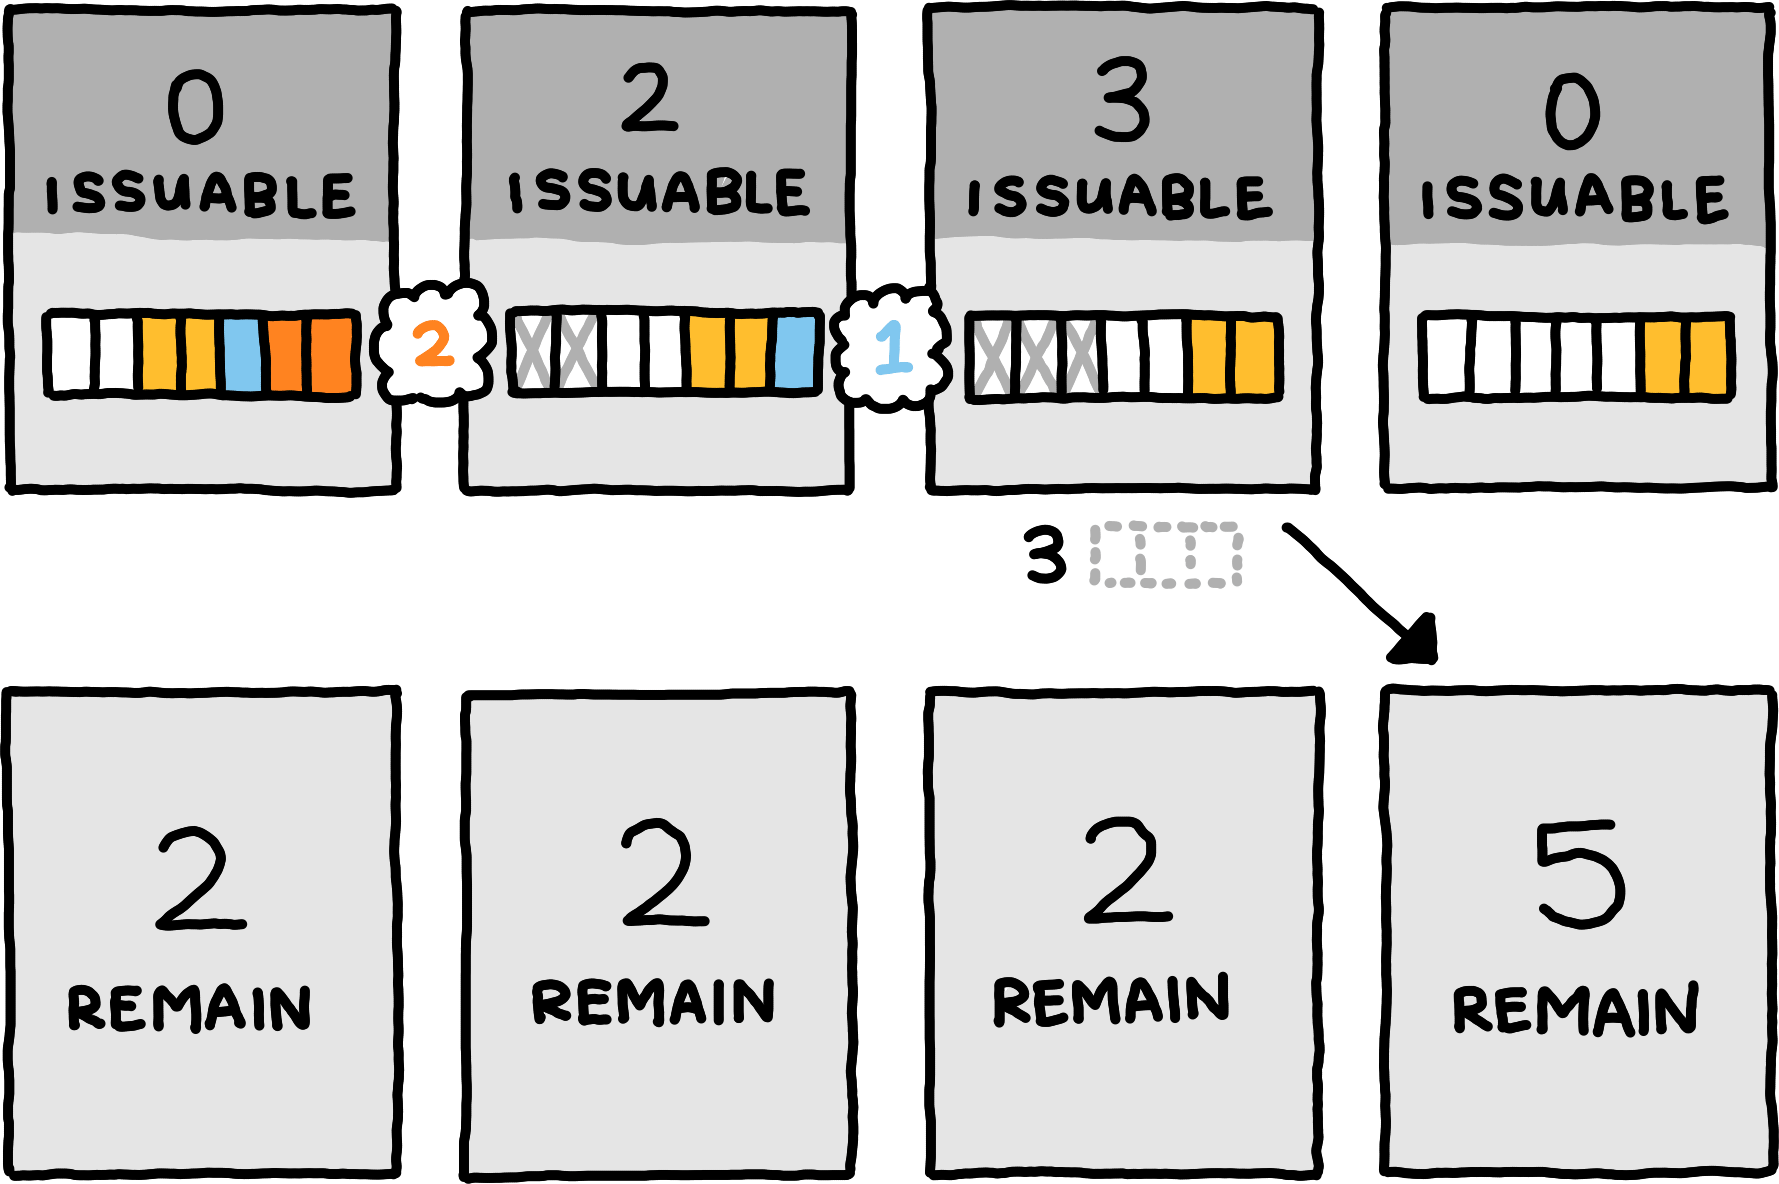 A server-client diagram. The server starts out with a buffer containing two empty slots, a message of size two, a message of size one, and a final message of size two. It has zero issuable guarantees, so the client has two remaining guarantees that correspond to the two unused buffer slots. The server processes its rightmost buffered message, leaving it with two more messages, and four empty buffer slots. For the two new open slots, no guarantees have been given yet, so the server’s issuable guarantees increase to two. Next, the server processes another message, increasing the issuable guarantees to three, and leaving only a single, two-byte message in its buffer. Finally, the server sends three guarantees to the client: the issuable guarantees go do to zero, and the client’s available guarantees go up from two to five.